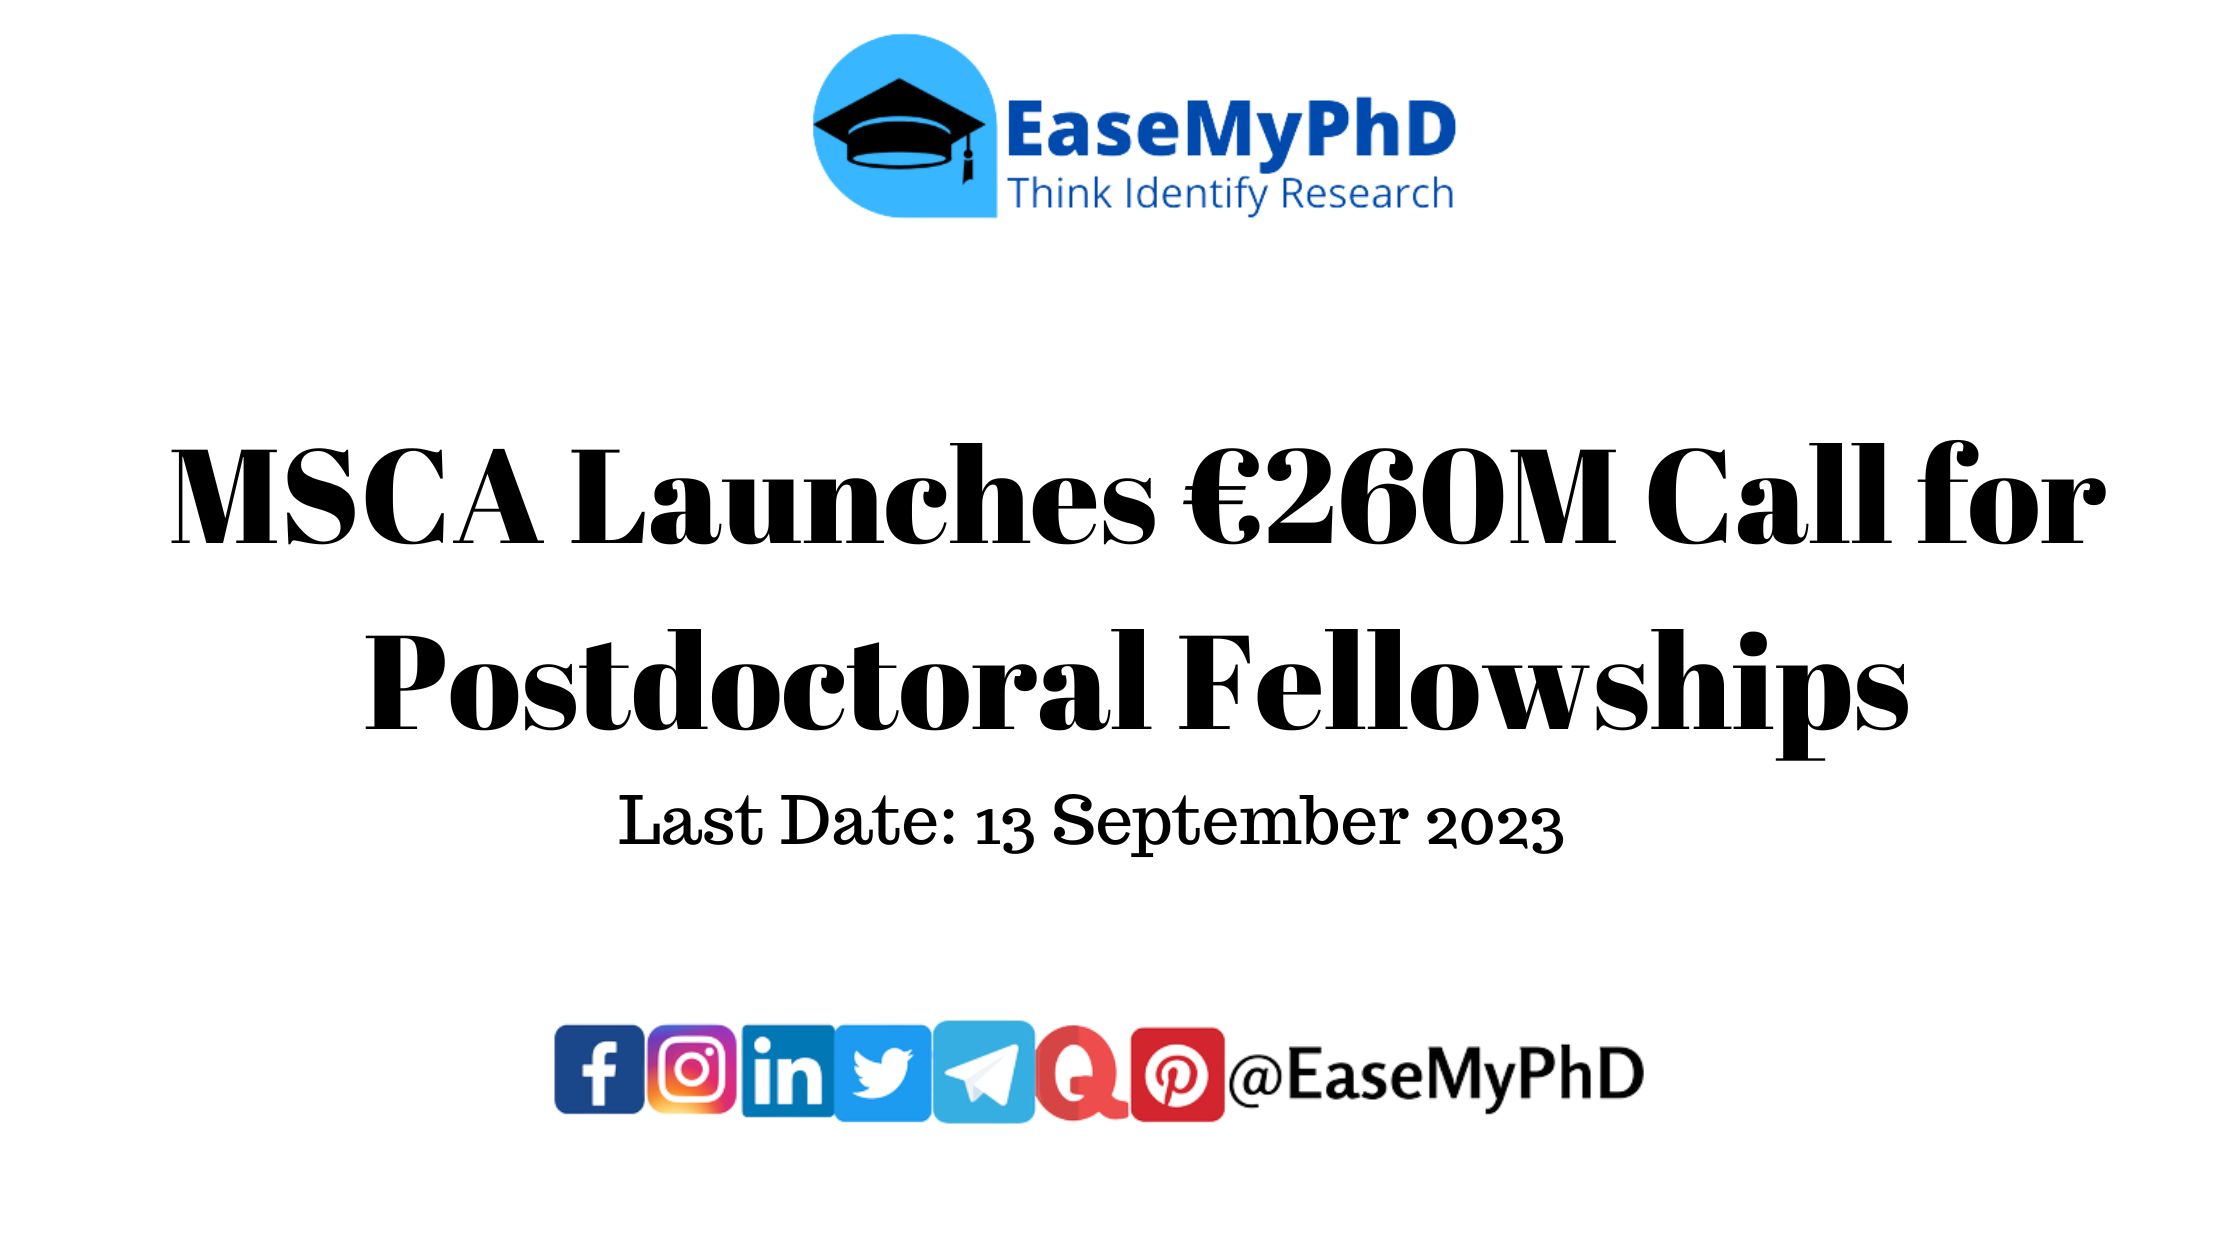 MSCA Launches €260M Call for Postdoctoral Fellowships, Marie Skłodowska-Curie Actions (MSCA) Fellowship, Last Date 13 September 2023